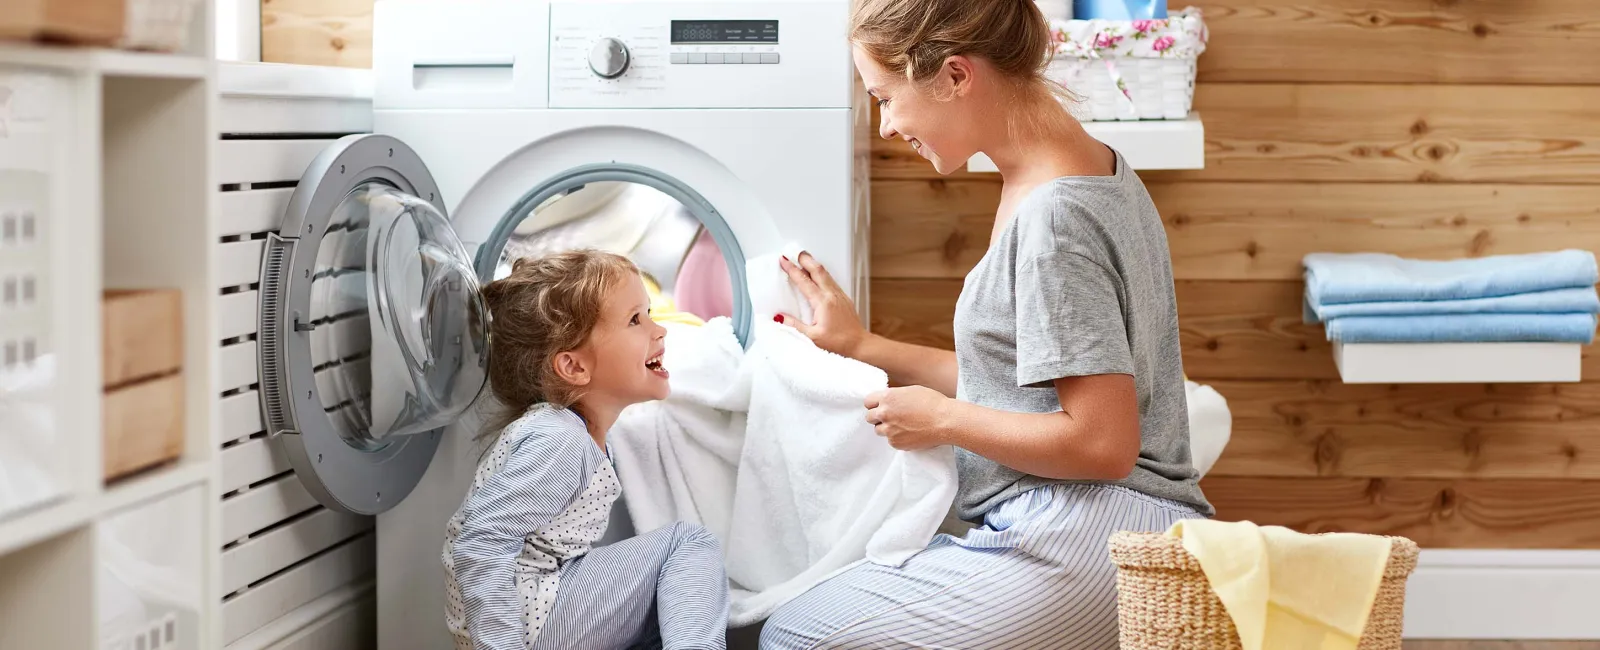 a person and a child sitting on the floor next to a washing machine